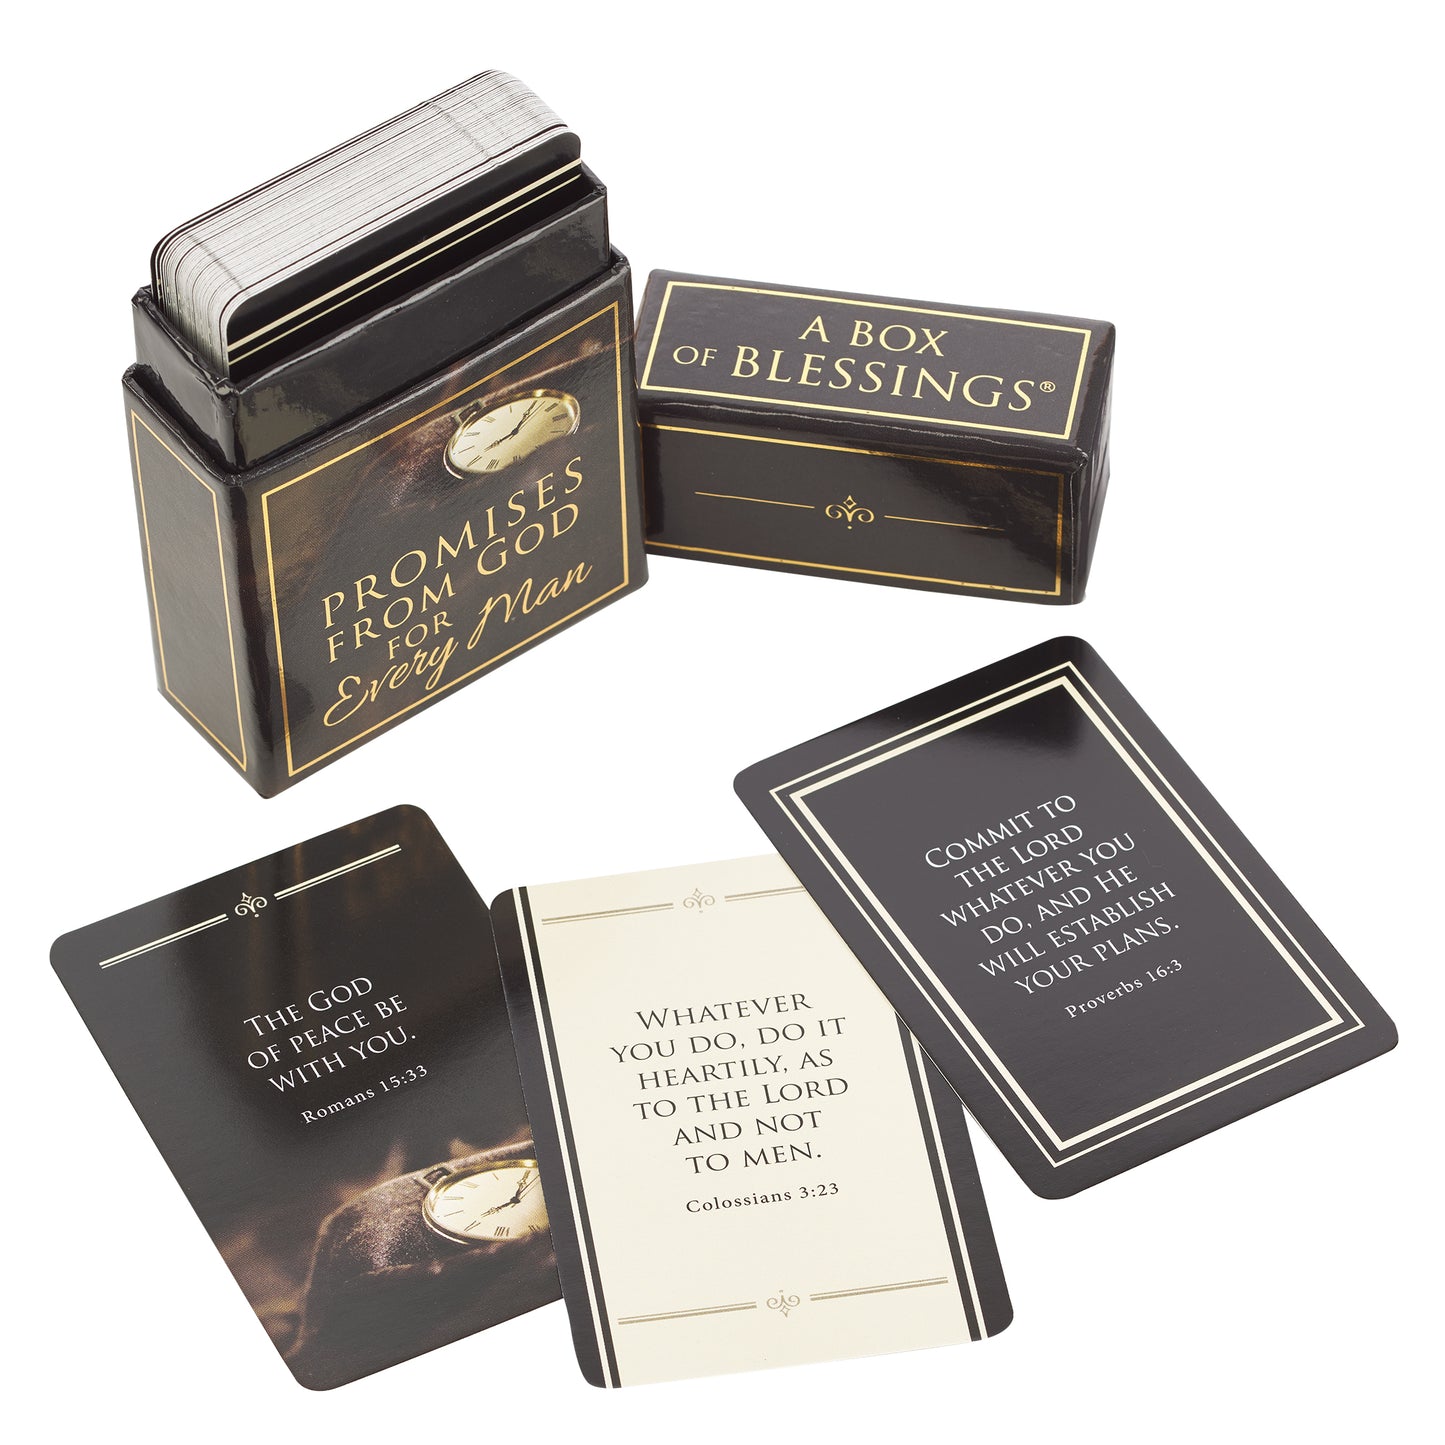 Promises From God For Every Man - Box of Blessings - The Christian Gift Company